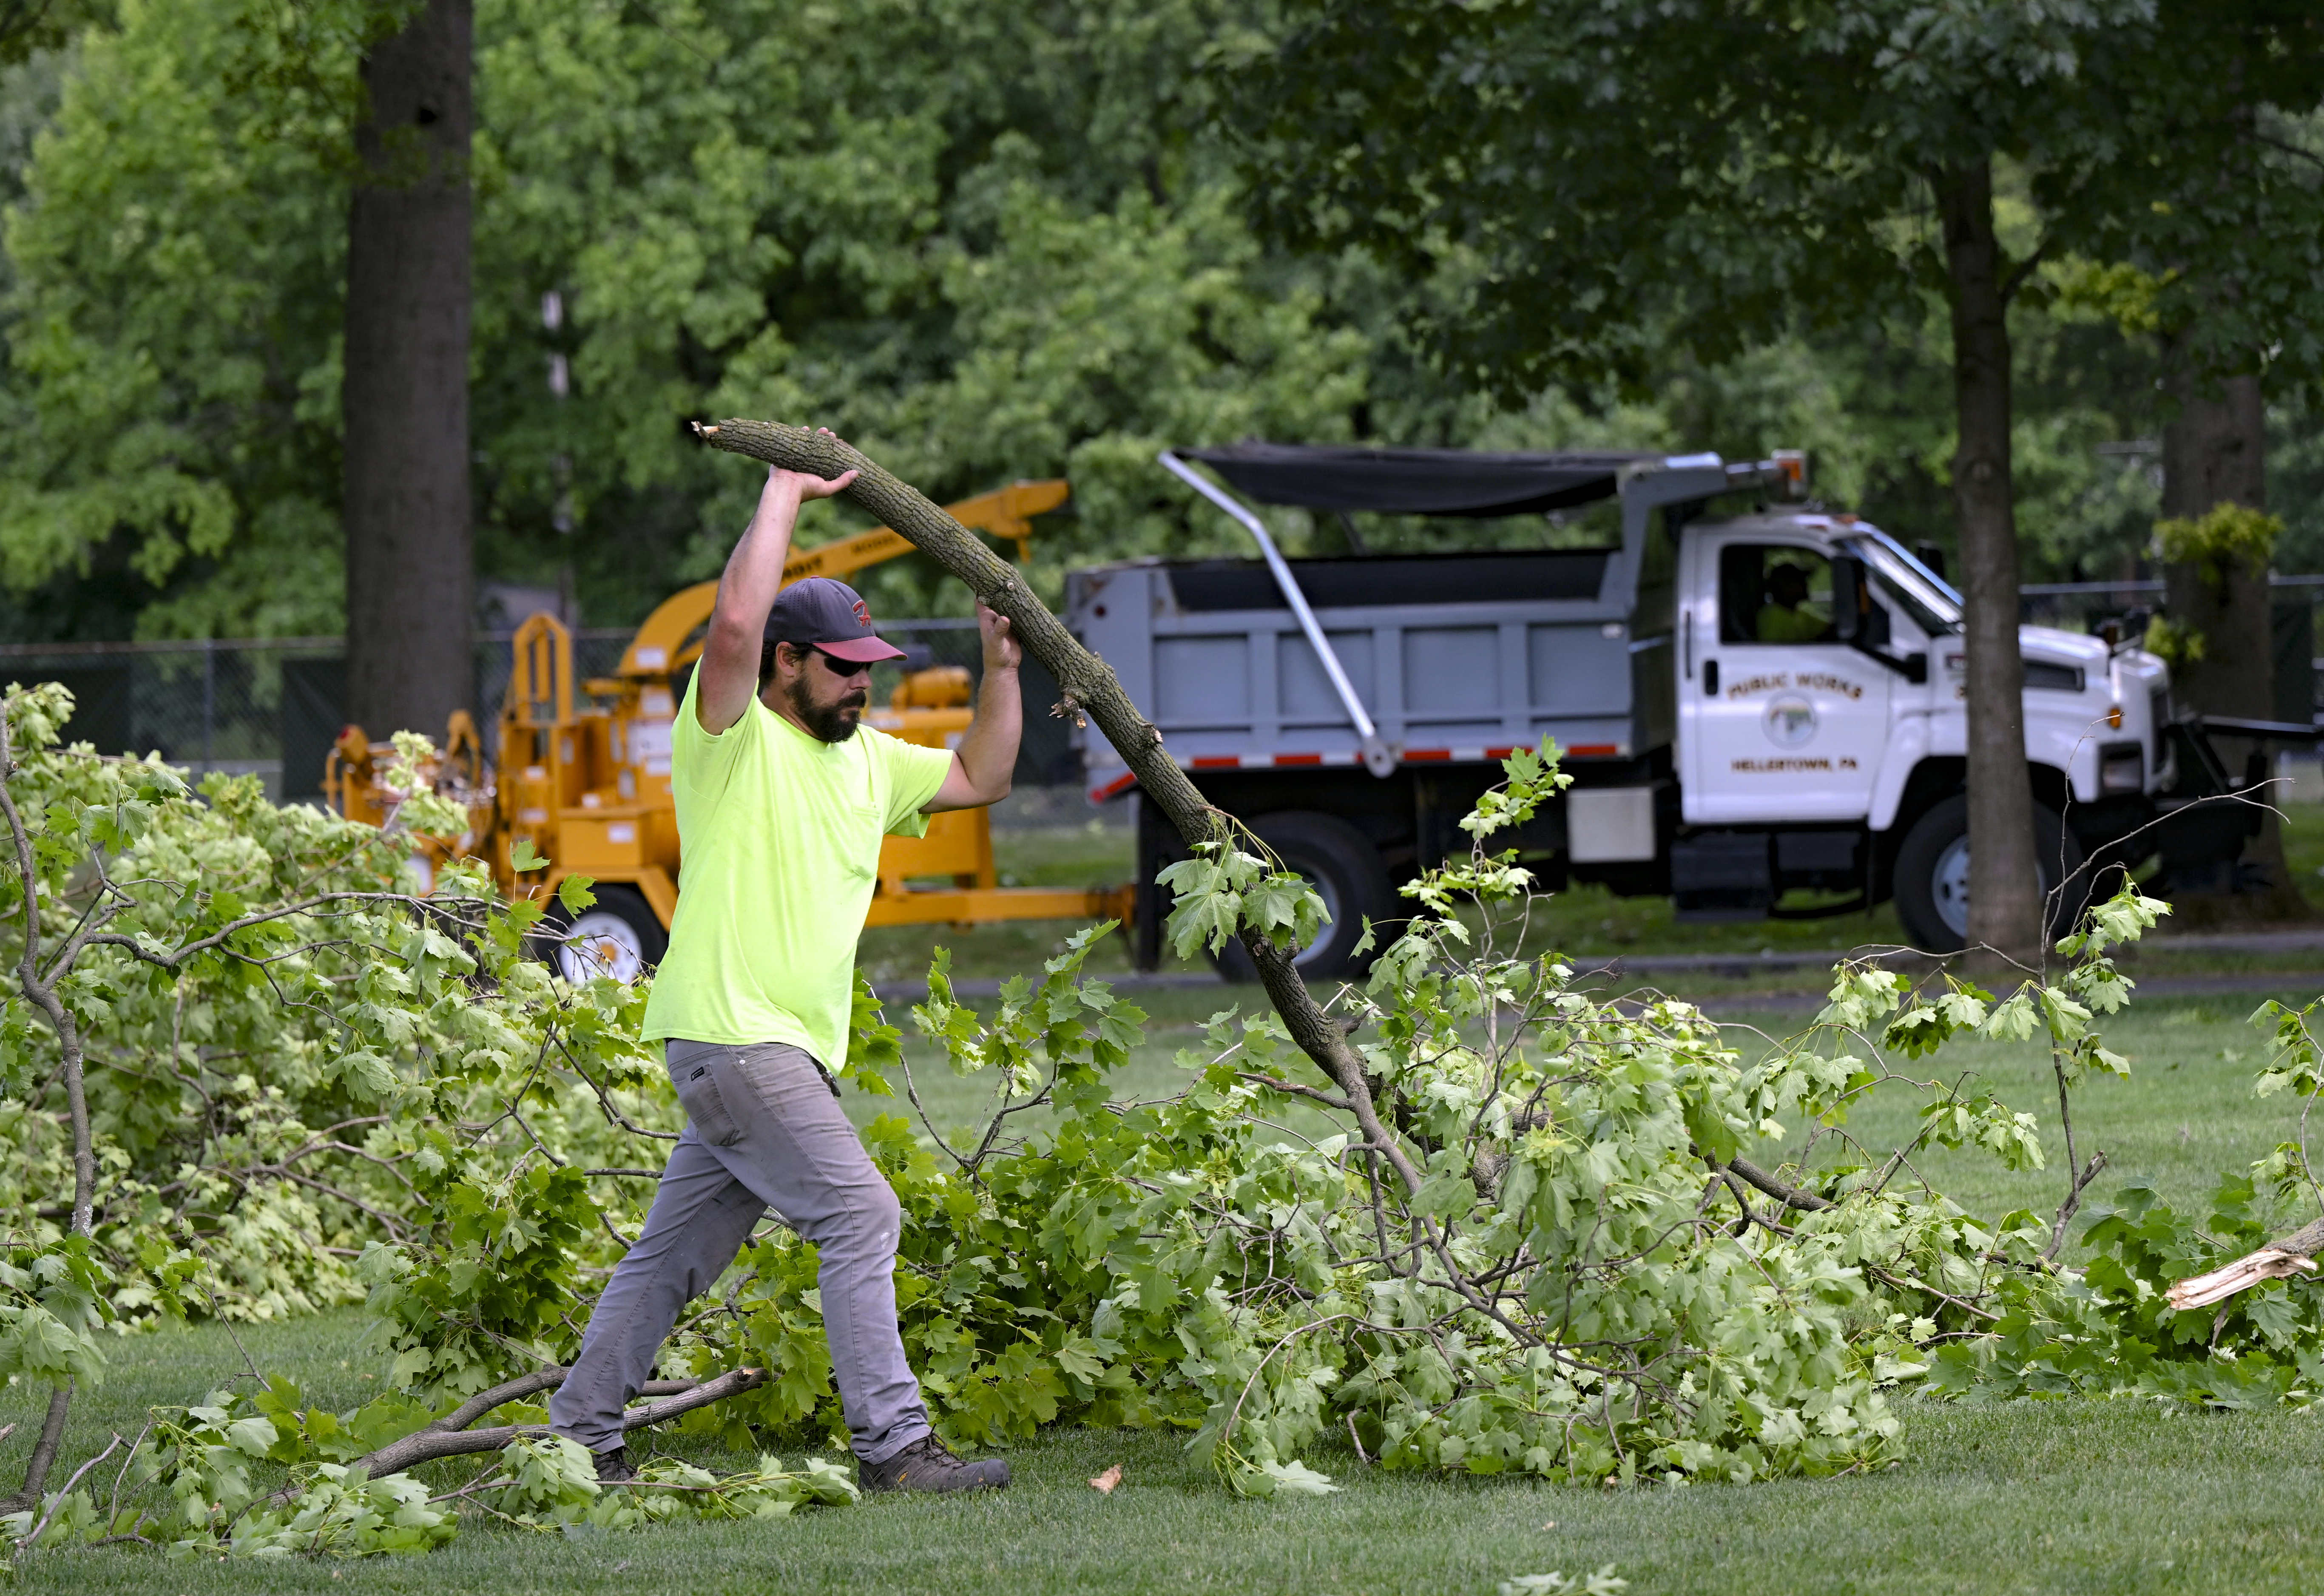 James Edge with Public Works picks up tree limbs and debris Thursday, June 27, 2024, at Dimmick Park in Hellertown after a severe thunderstorm with nearly 60 mph wind gusts ripped through the Lehigh Valley the night before. (Monica Cabrera/Special to The Morning Call)